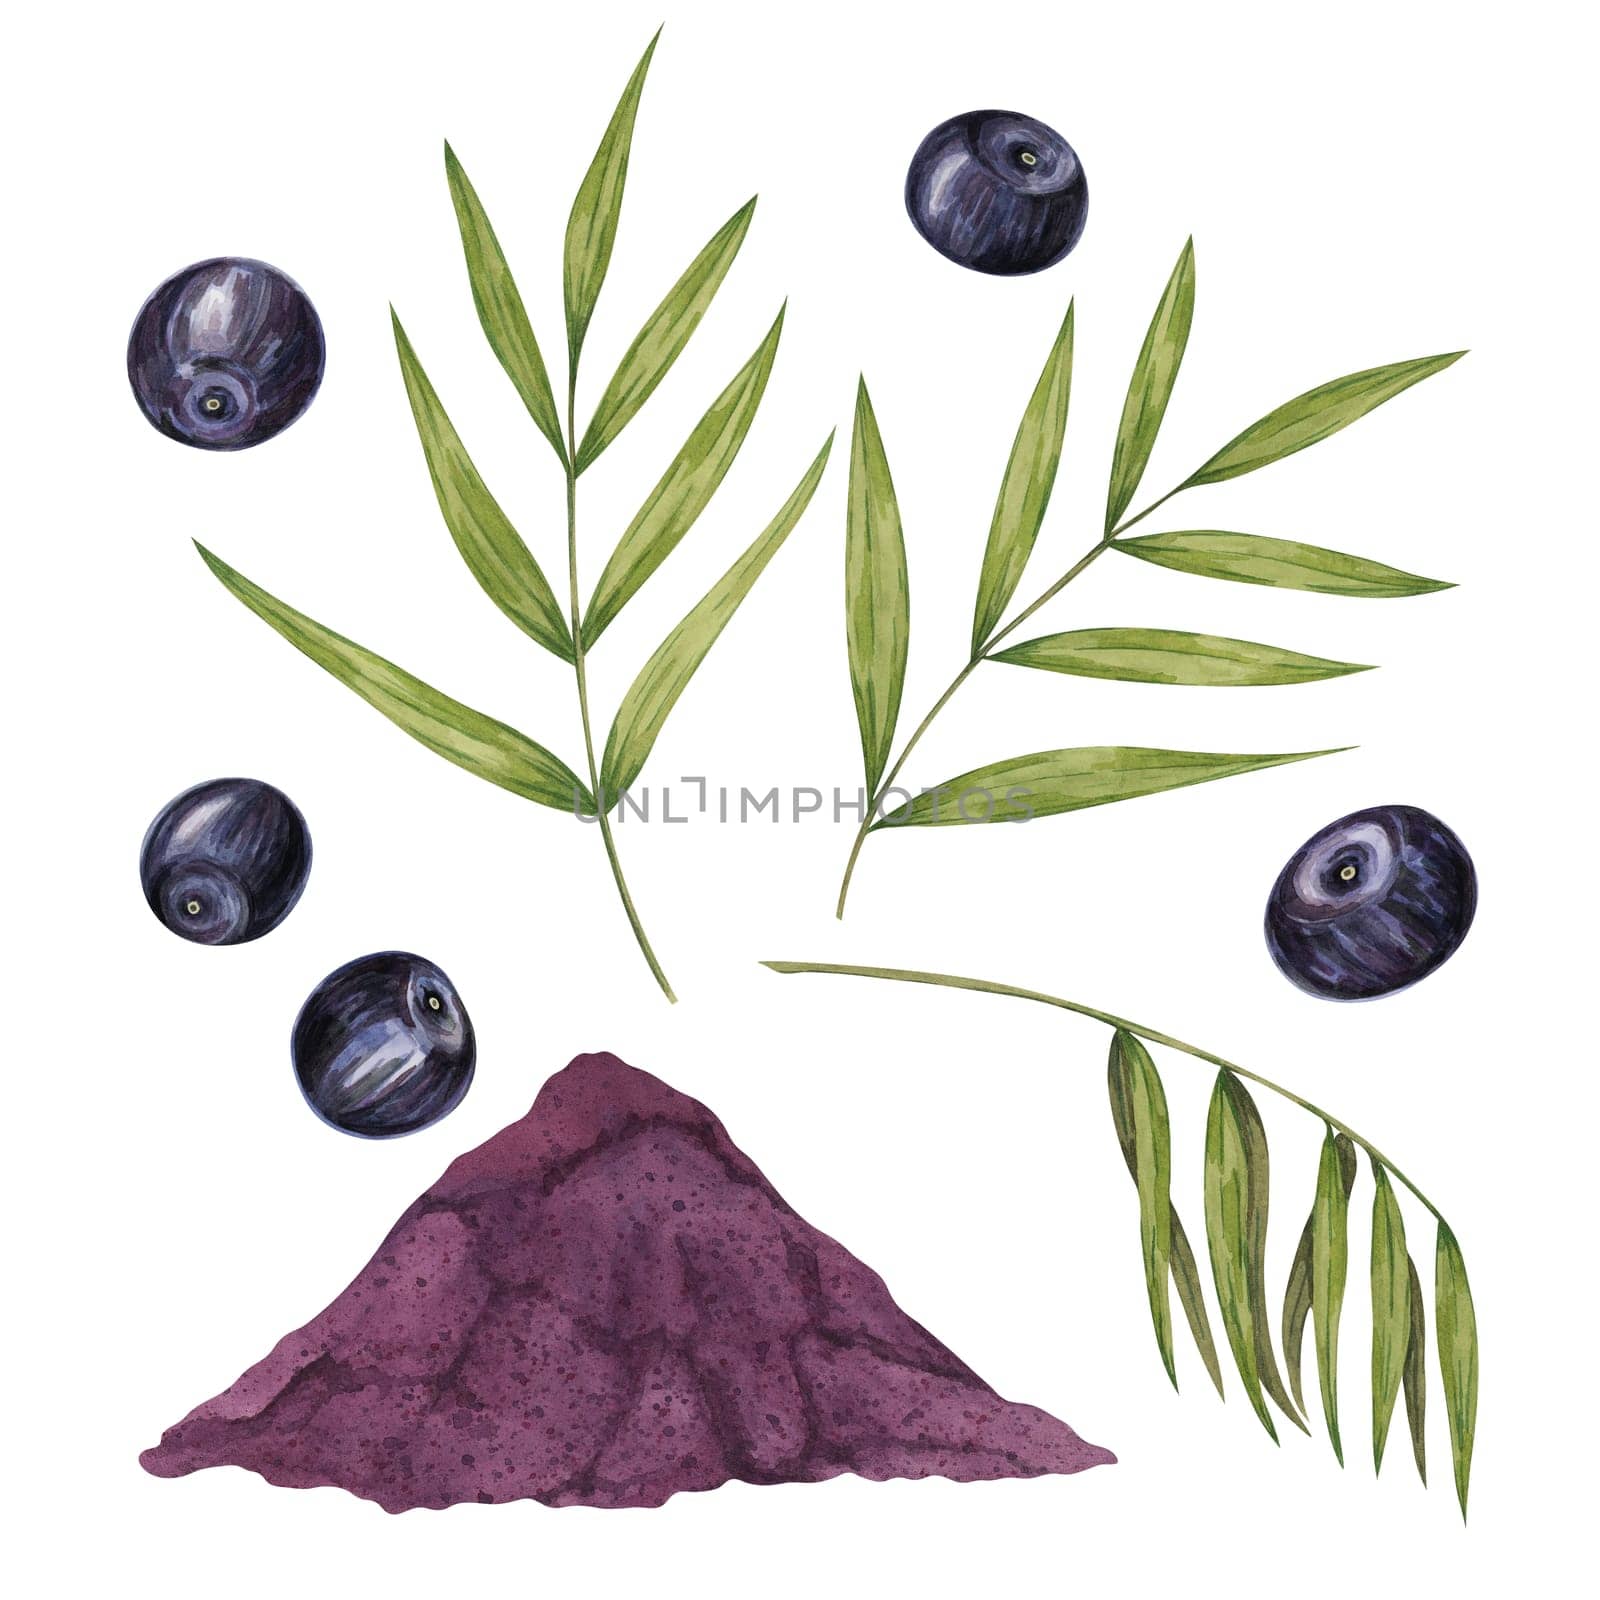 Acai berries, powder and palm leaf elements. Exotic purple tropical berries. Watercolor illustration for cosmetics, packaging, supplements, labels by Fofito